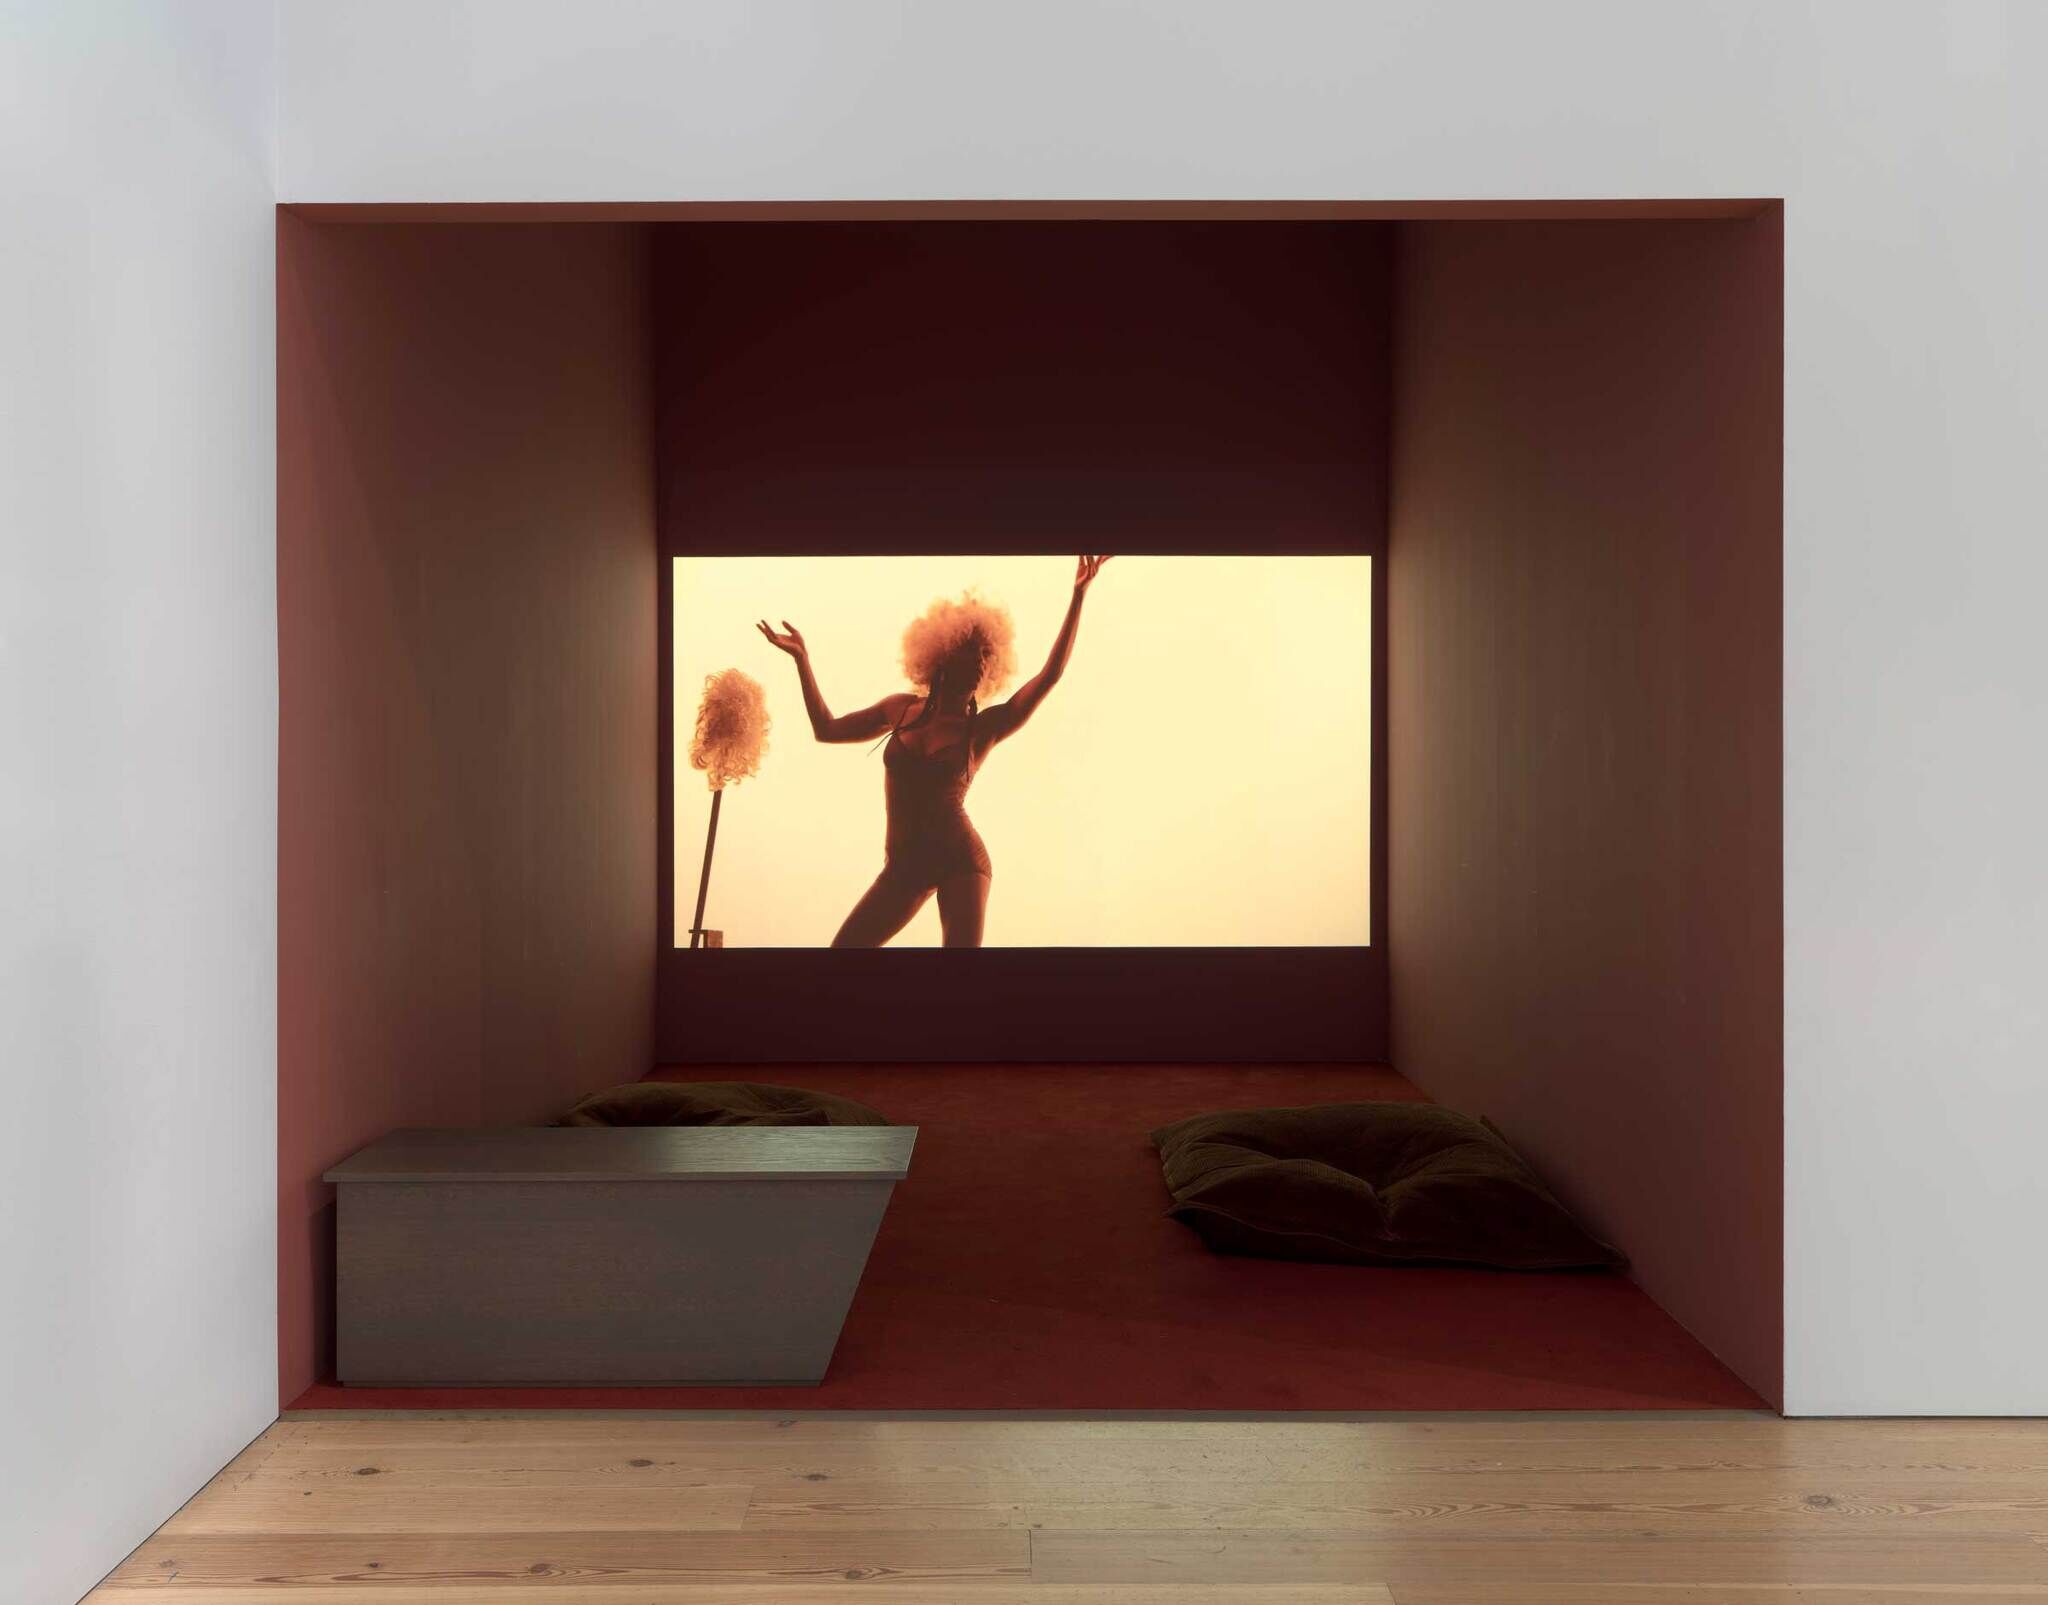 Silhouette of a person with an afro dancing in a sunlit window, with a minimalist room interior.